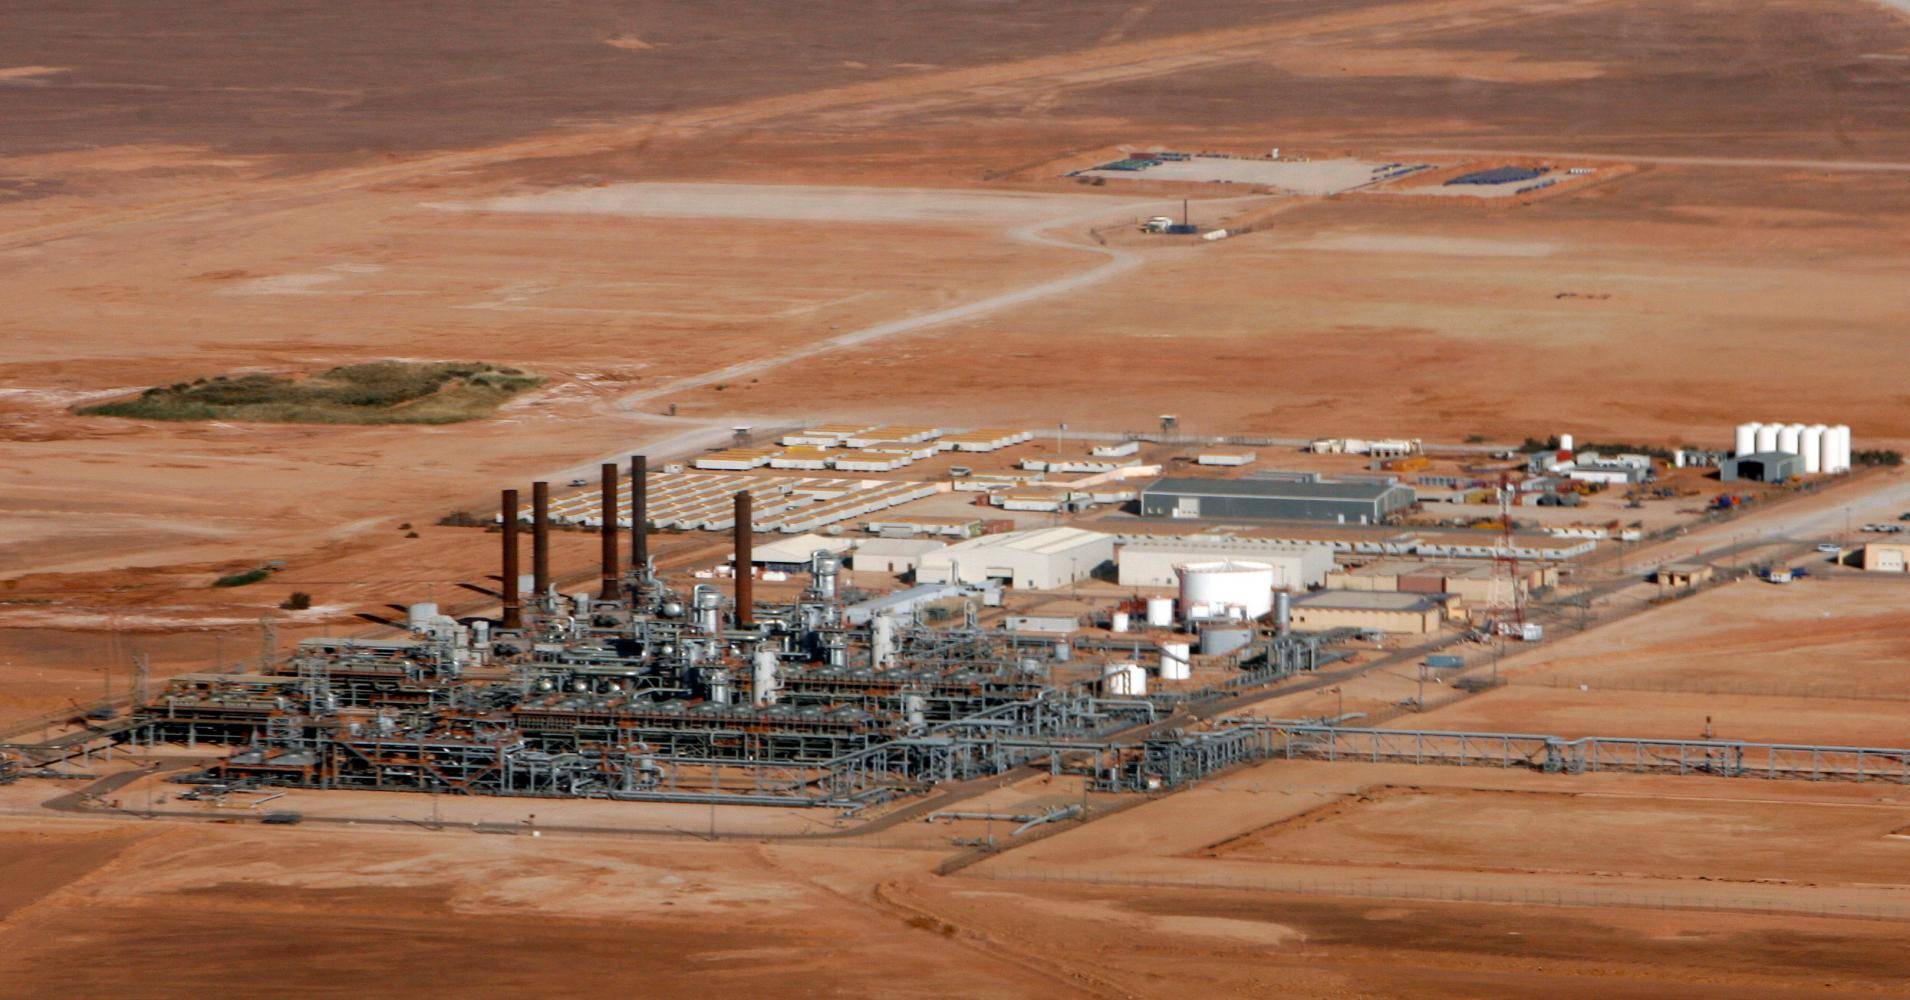 Algeria, net gas importing country in 2030, official